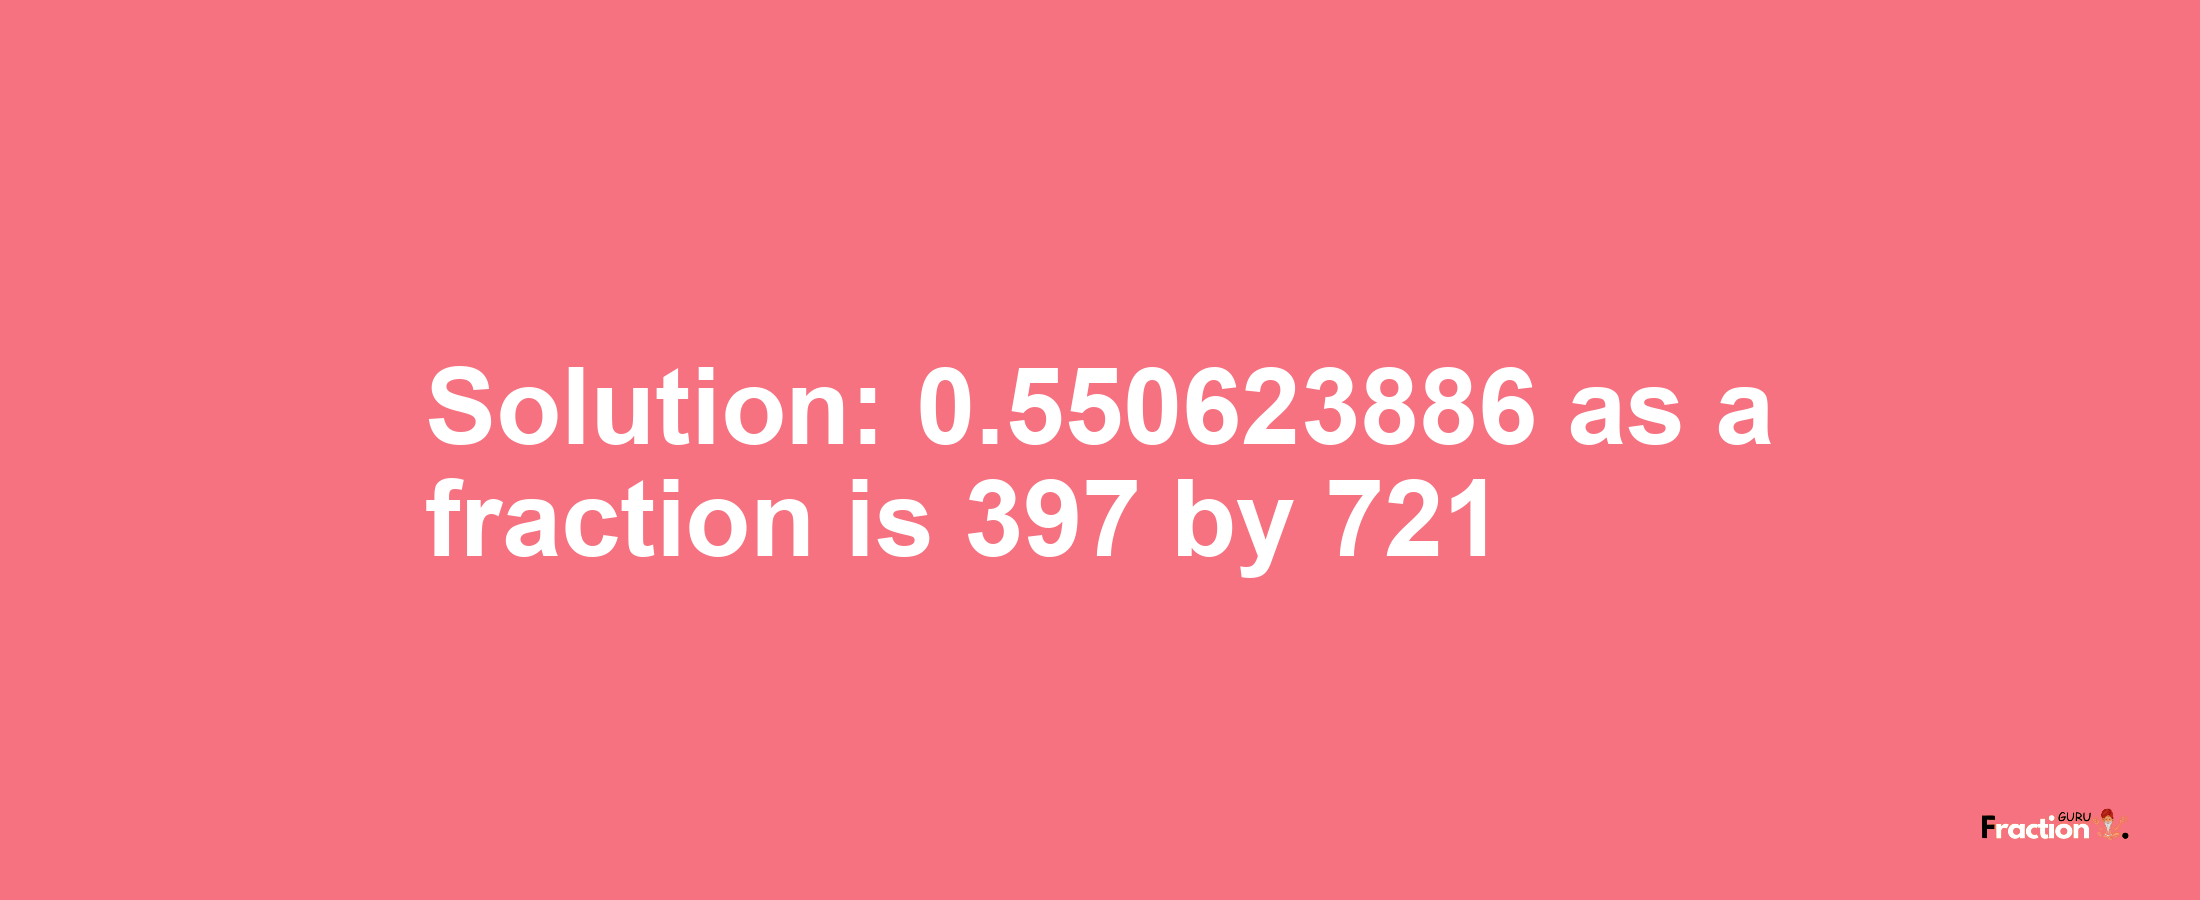 Solution:0.550623886 as a fraction is 397/721